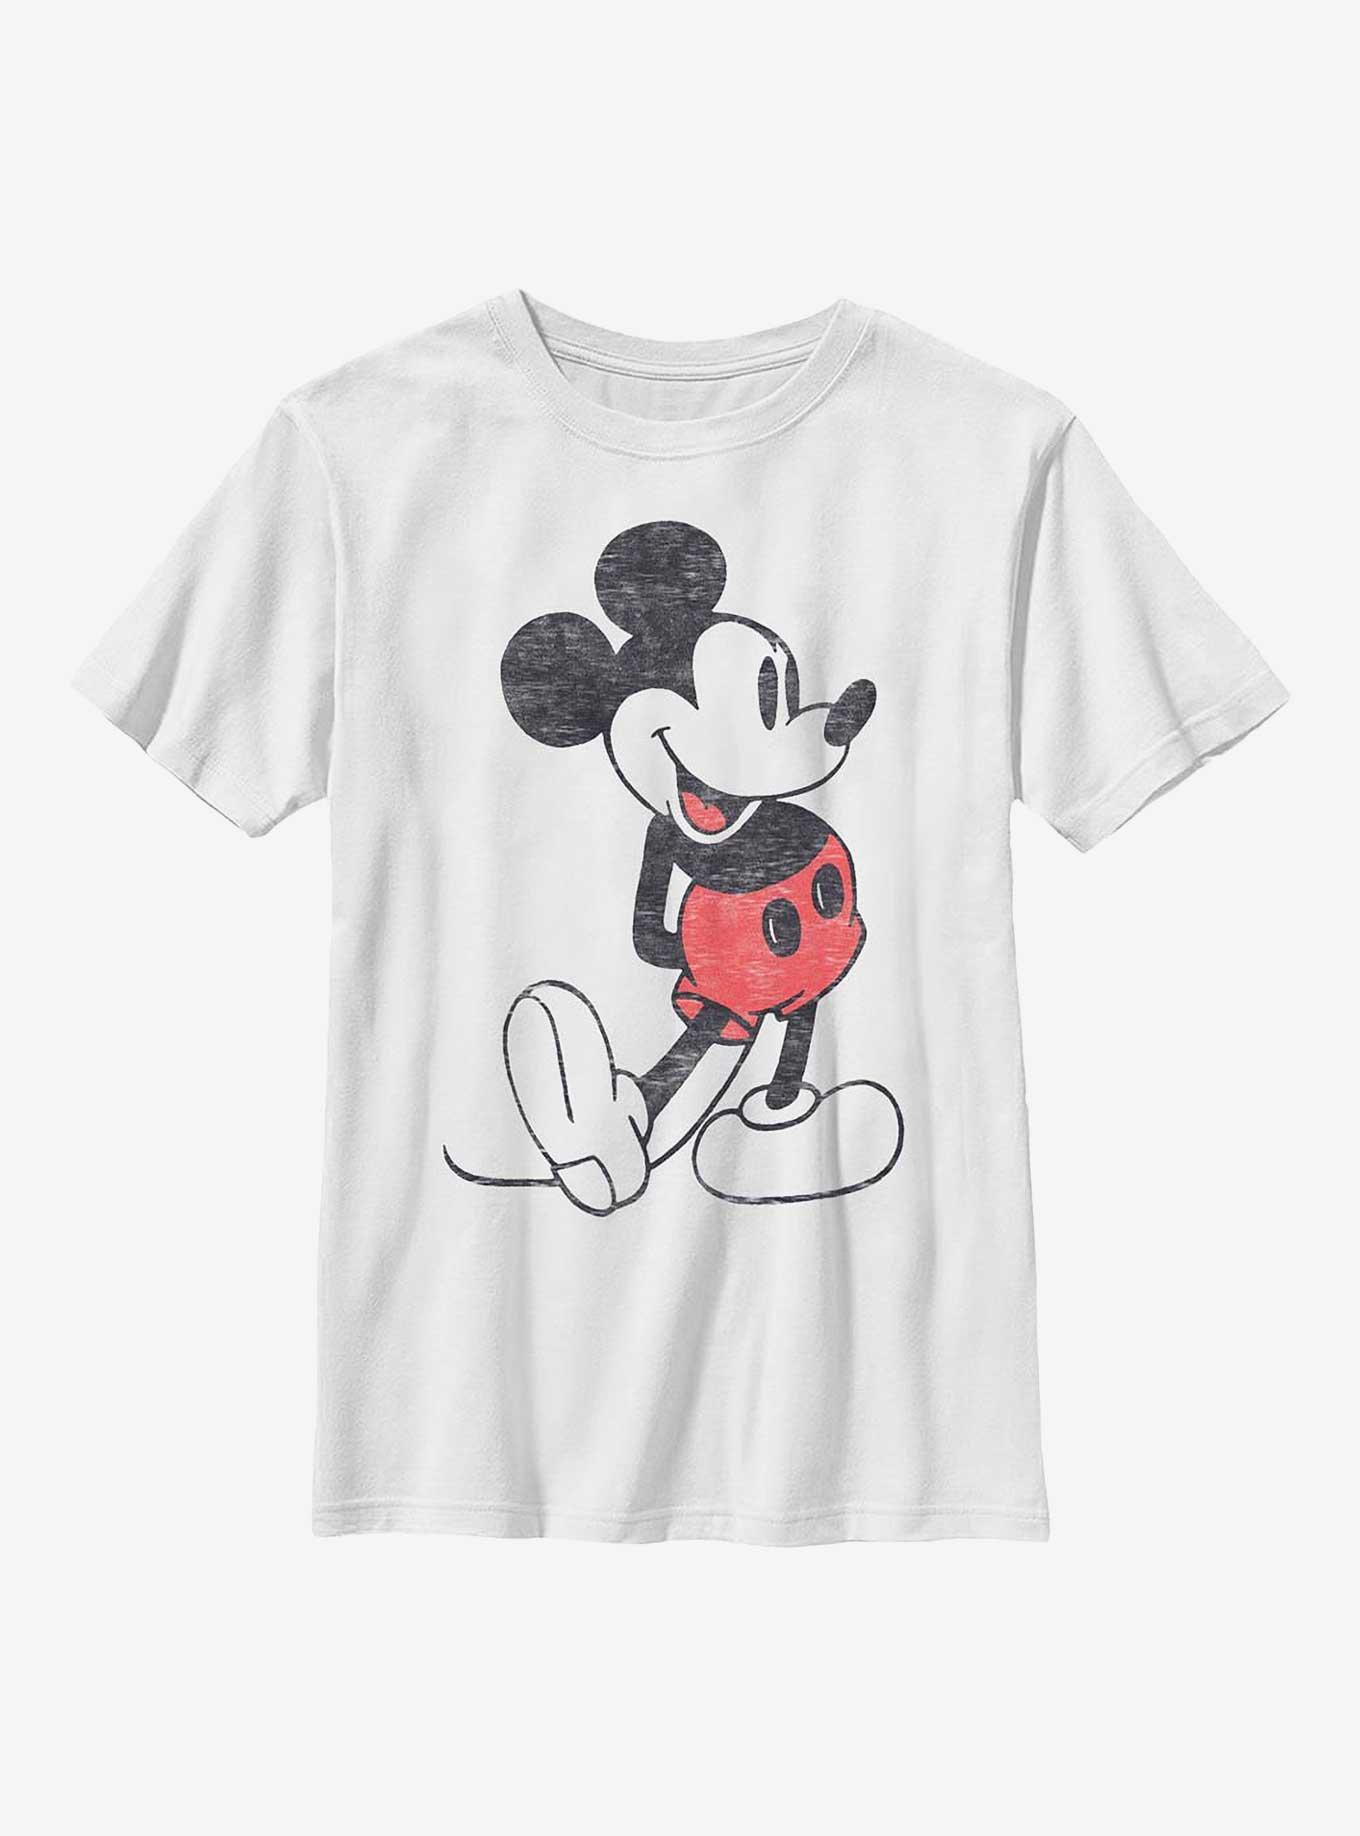 Disney Mickey Mouse Vintage Classic Youth T-Shirt, WHITE, hi-res